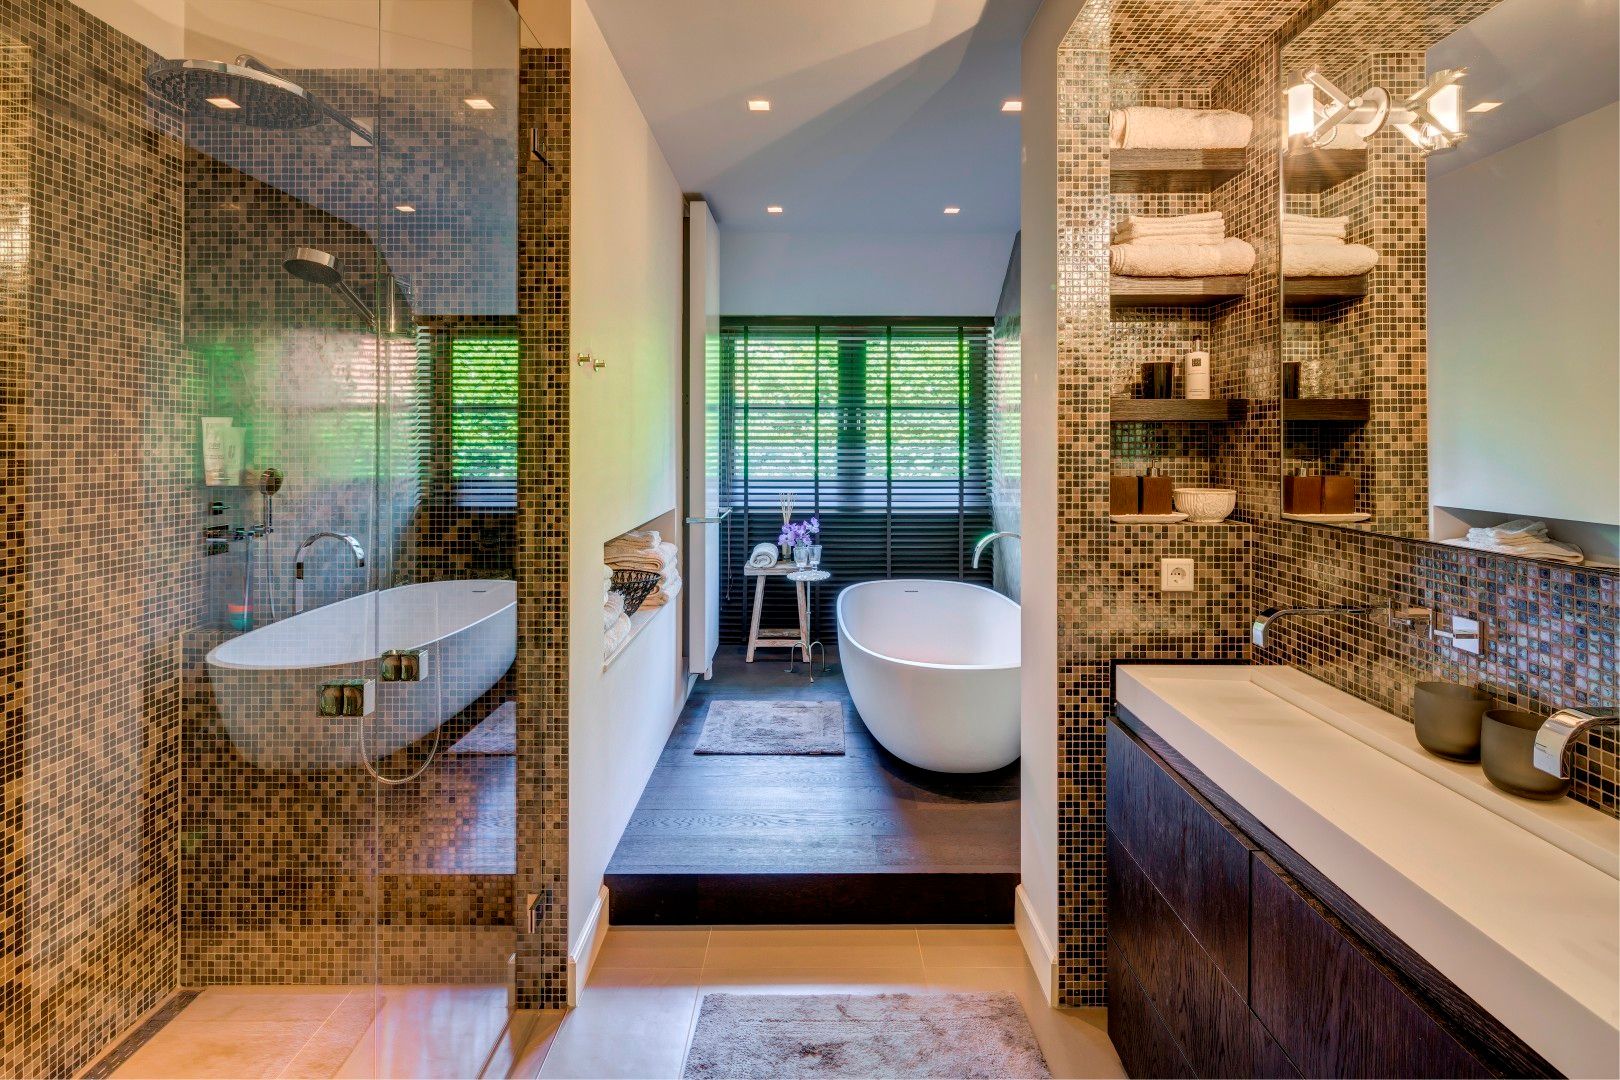 12 Luxury bathrooms to inspire your very own | homify